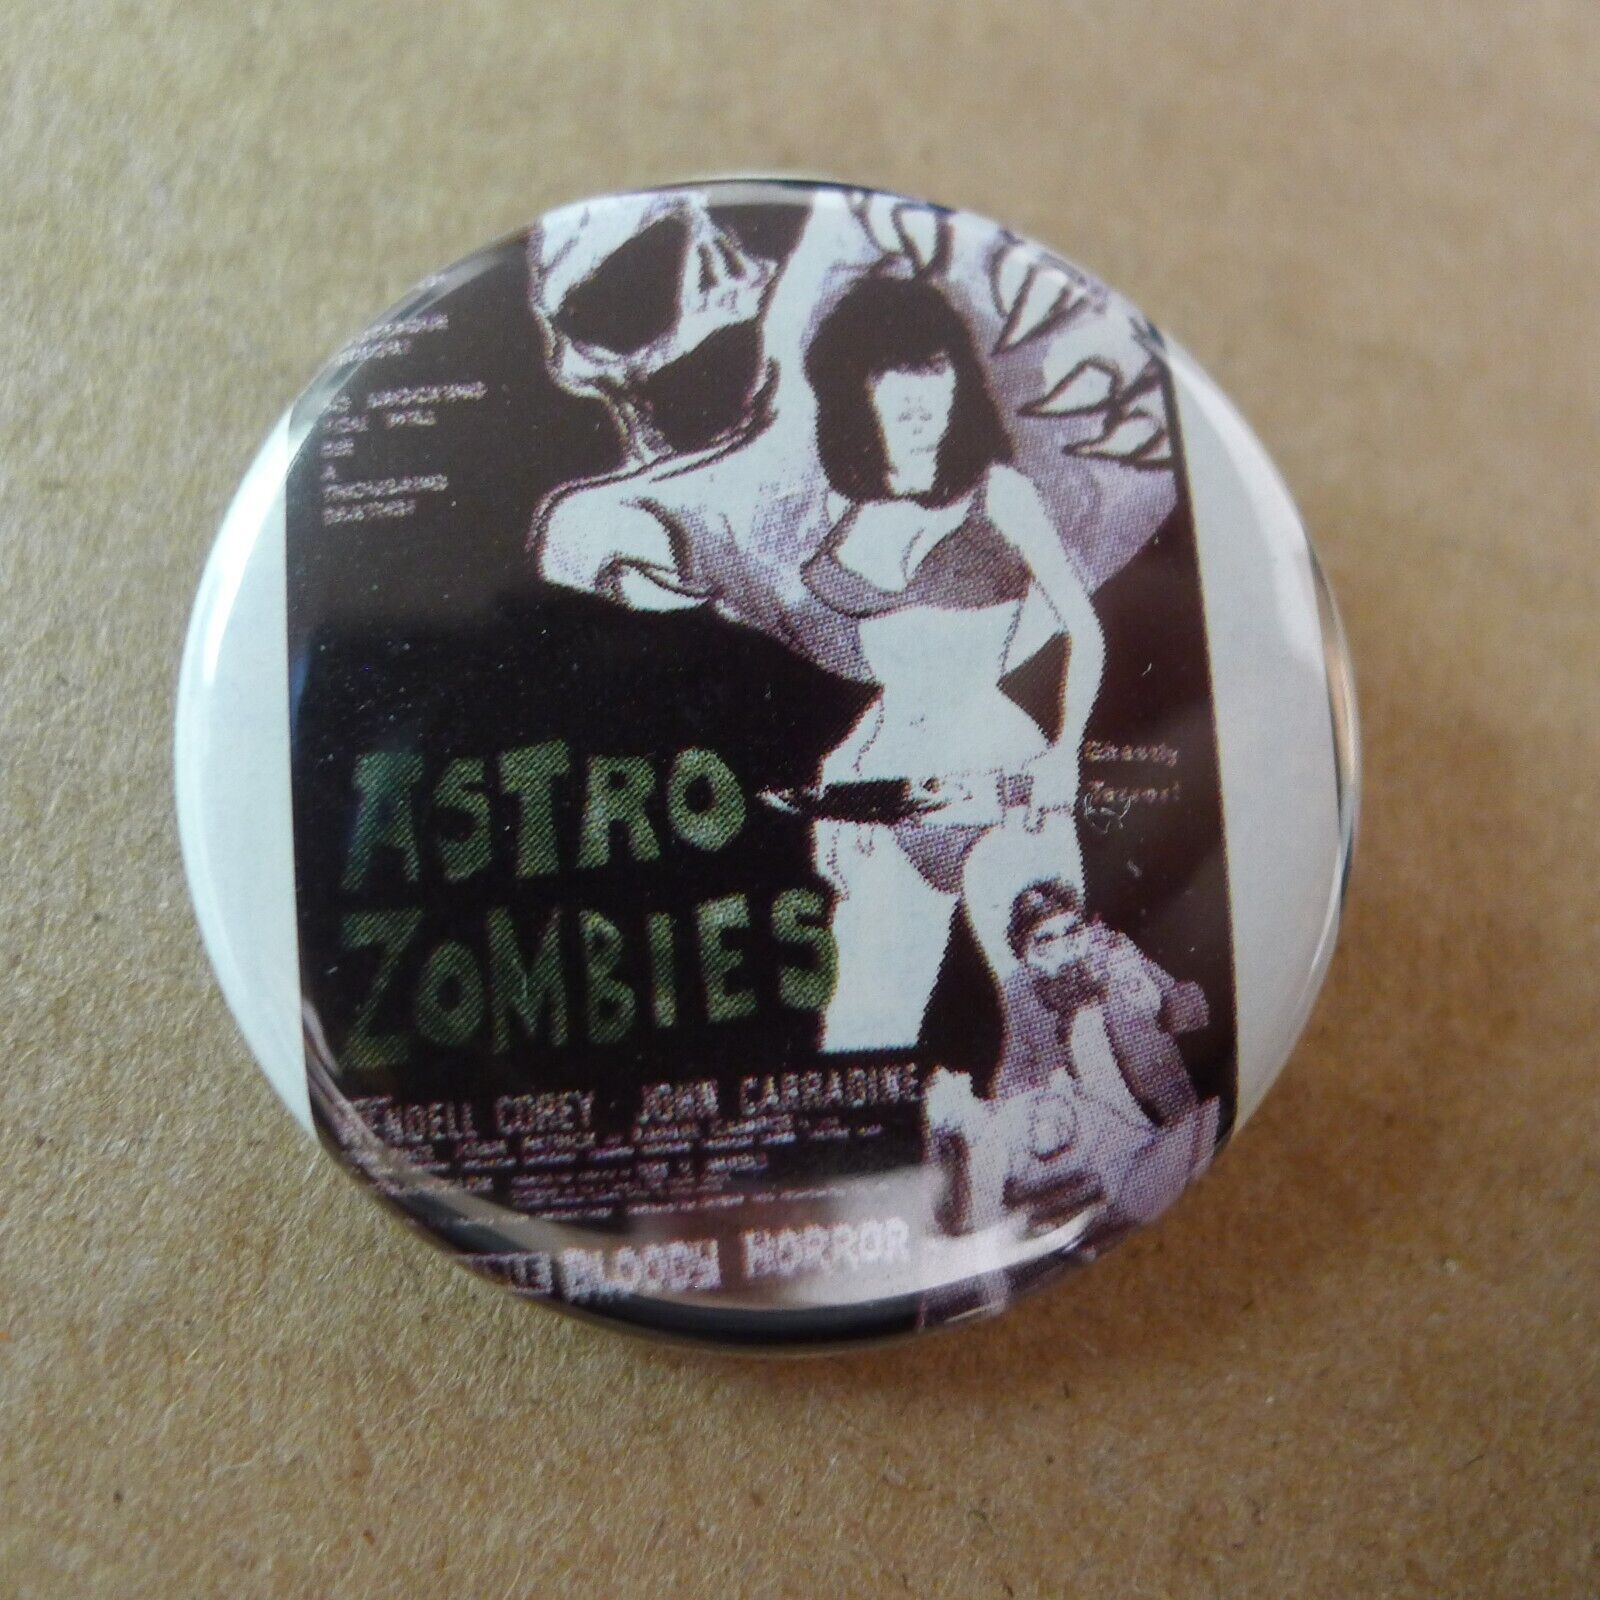 ASTRO ZOMBIES Pinback Button PIN badge MOVIE cult HORROR tura satana TED MIKELS